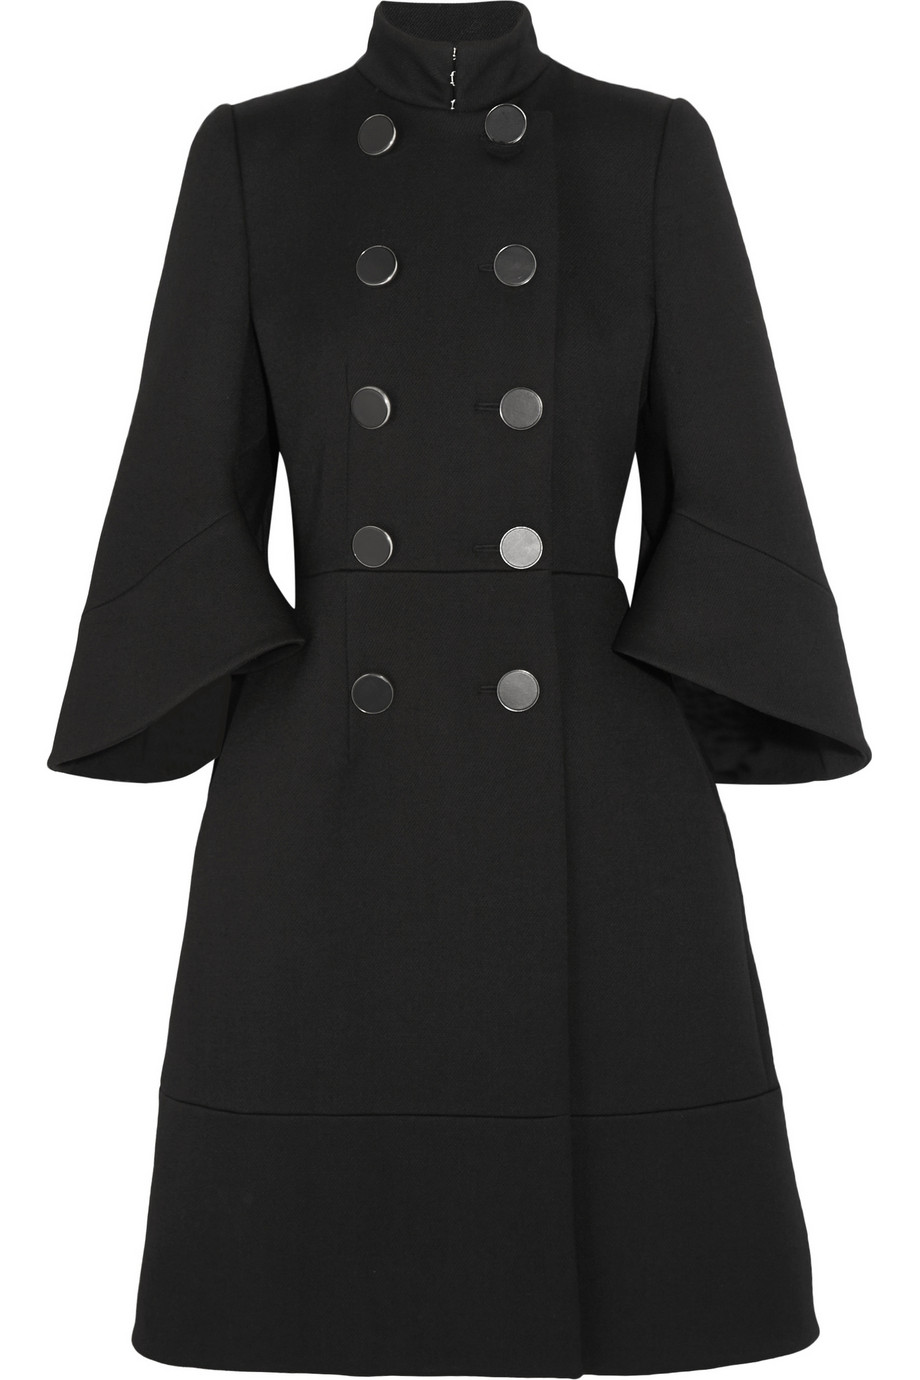 Women's 2015 Fall Coat Trends Military Trench MiKADO